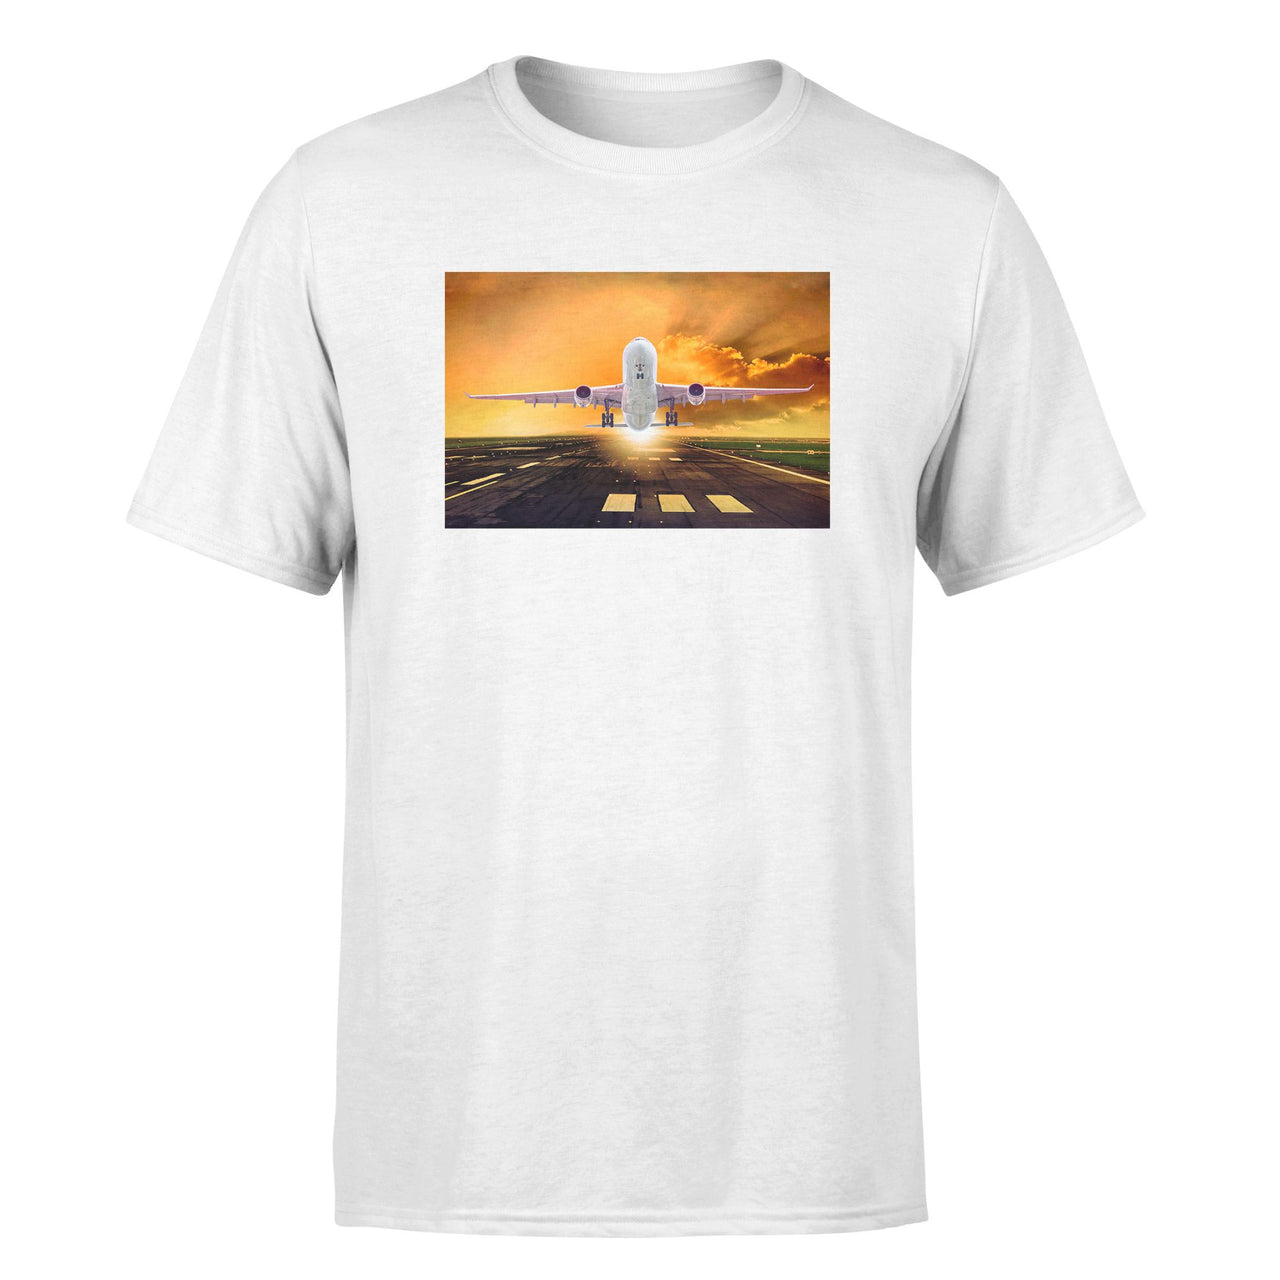 Amazing Departing Aircraft Sunset & Clouds Behind Designed T-Shirts